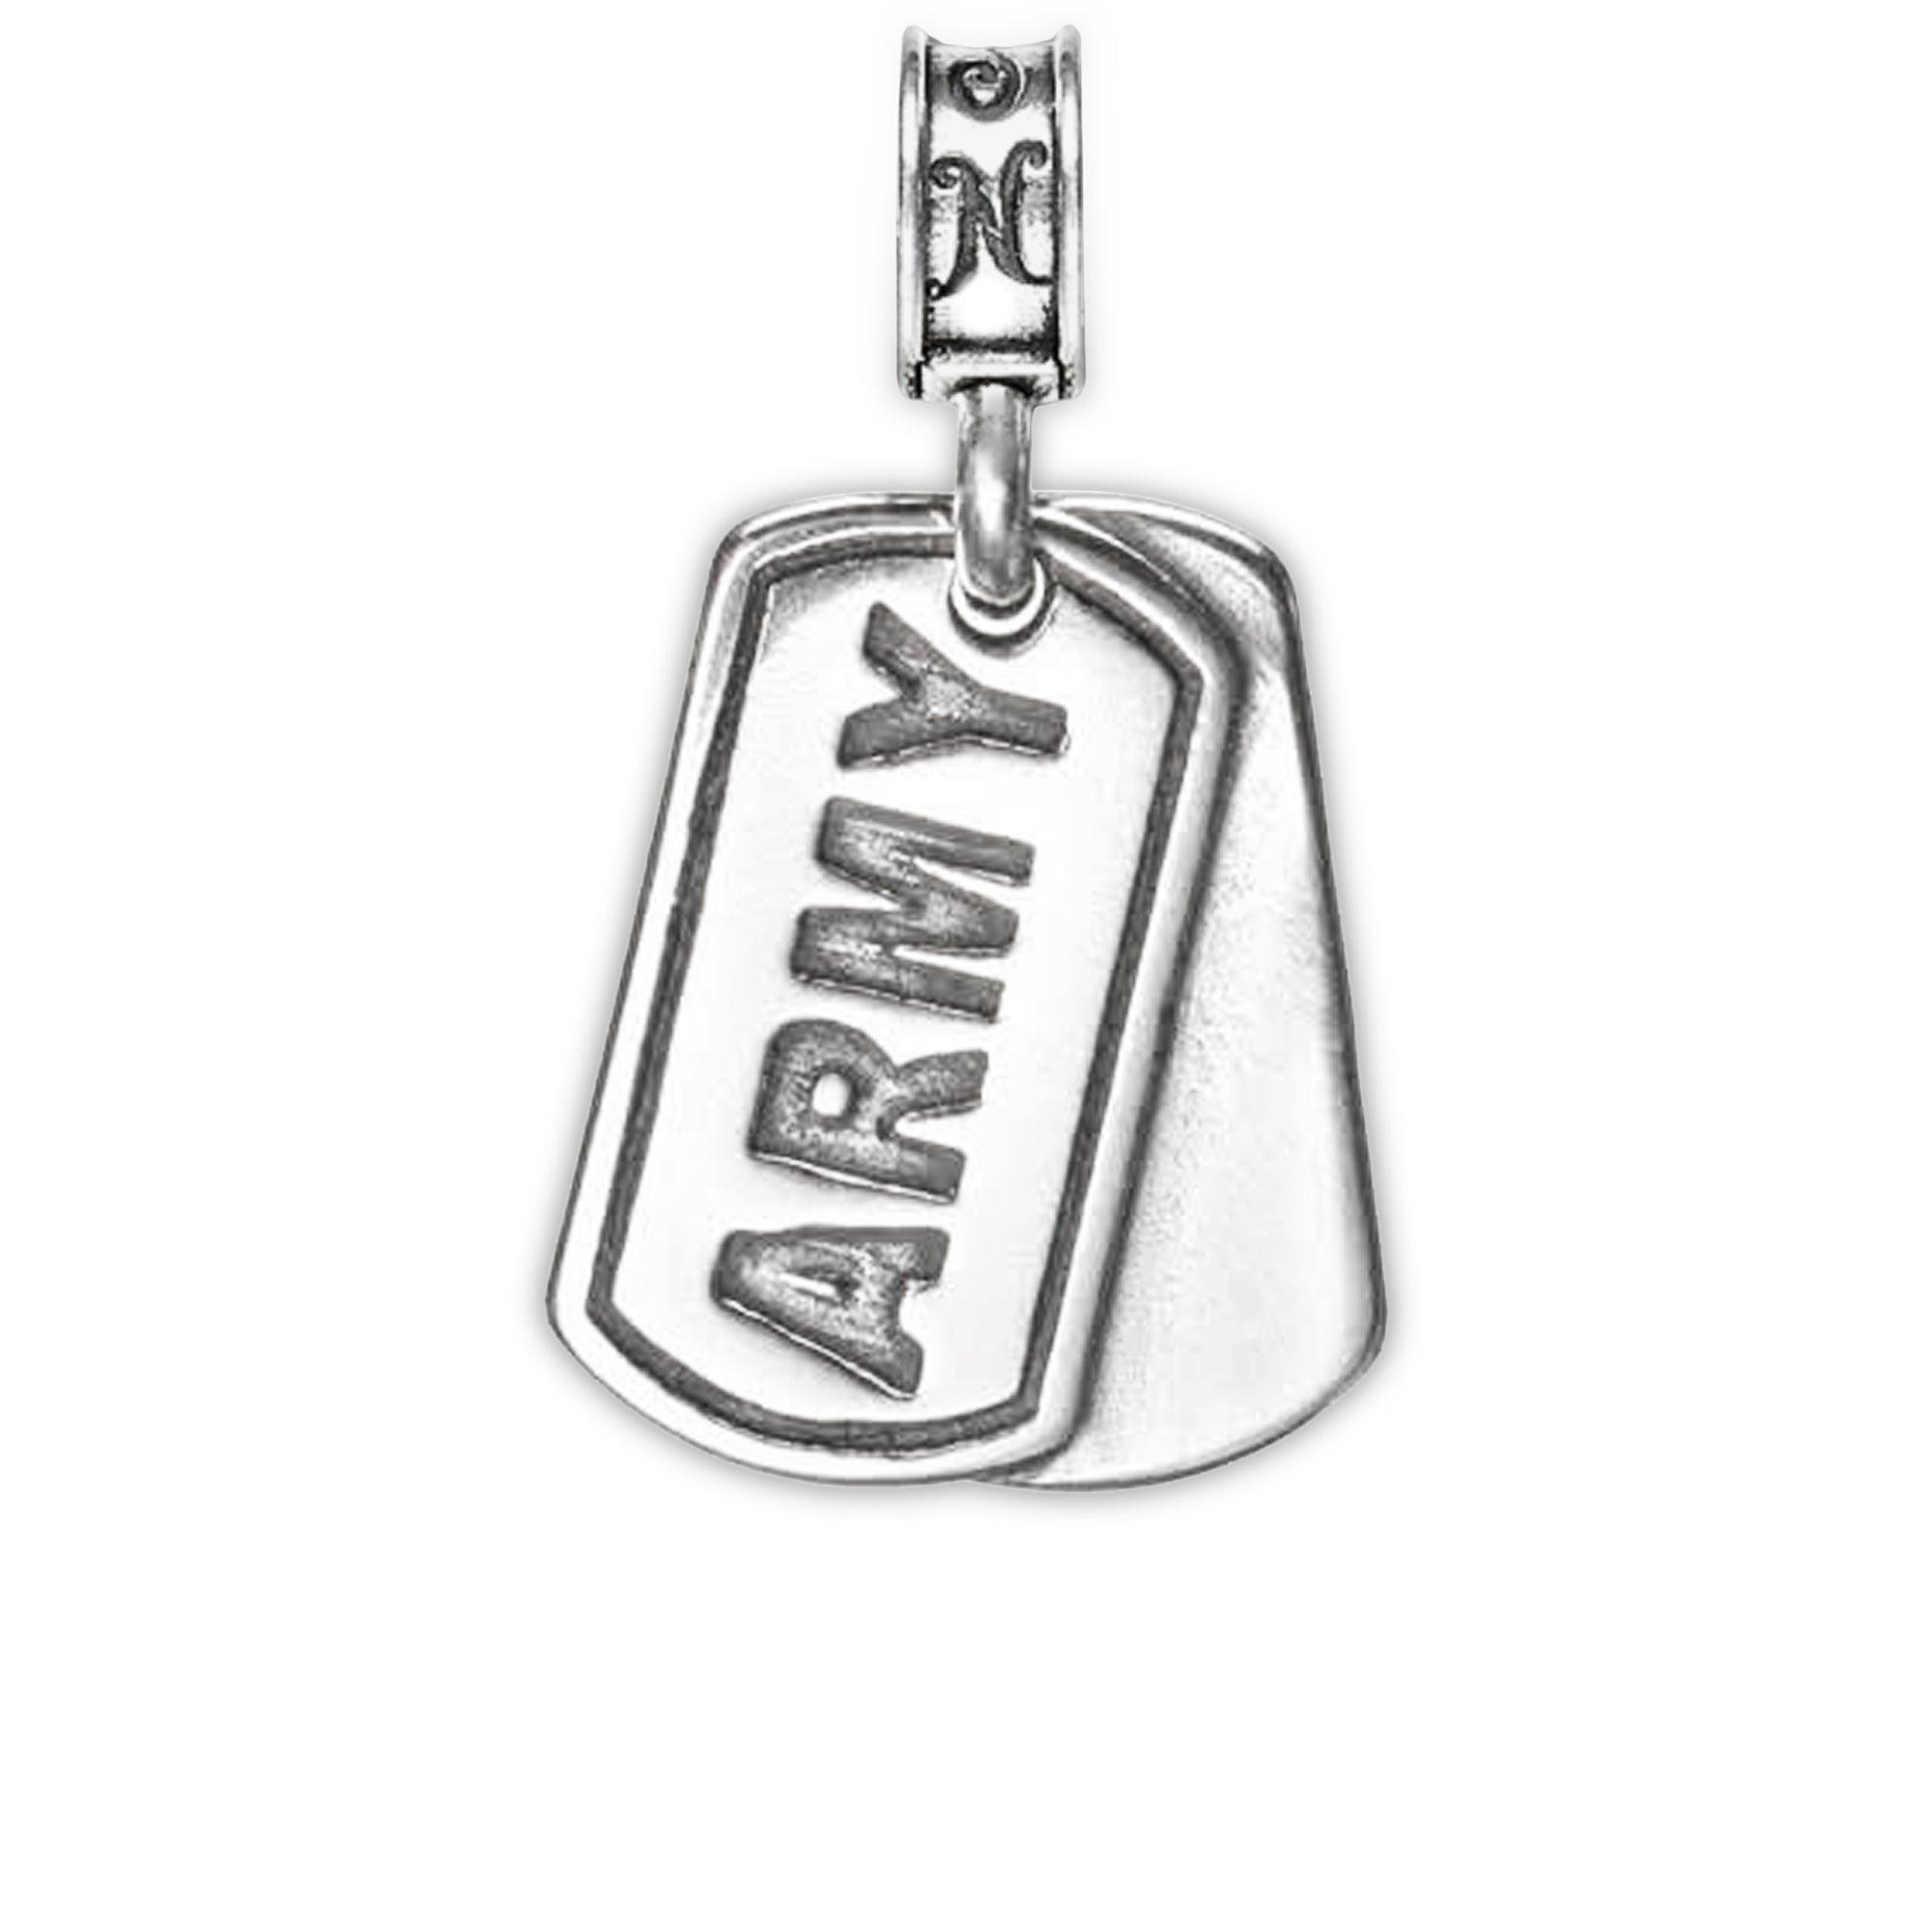 Military Jewelry, Military Charms, United States Army, Military Gifts, Army Dog Tag